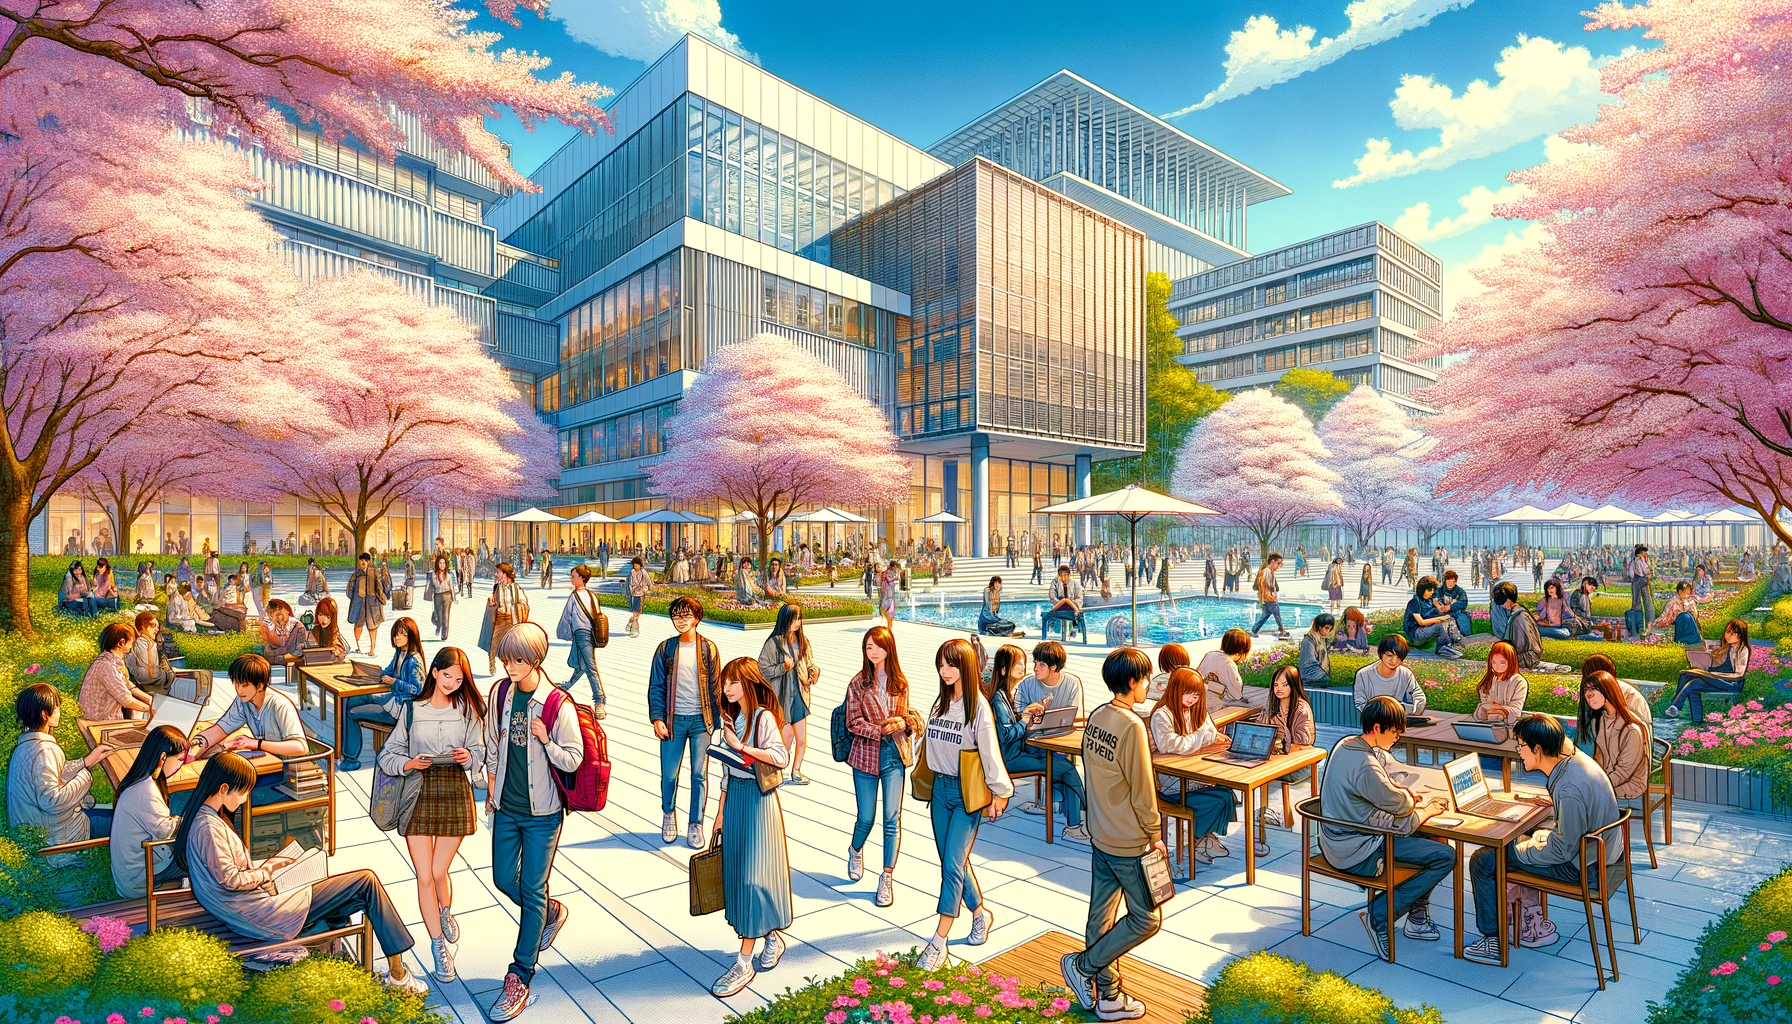 A vibrant university campus scene depicting the popularity of Chiba University in Japan. The image features a large group of diverse students of various Asian descents, casually dressed, walking and chatting among cherry blossoms in full bloom. The university's modern architecture, with sleek glass buildings and landscaped gardens, is visible in the background. The scene is lively, with students engaging in outdoor activities like reading, using laptops, and group discussions, showcasing a bustling academic environment.